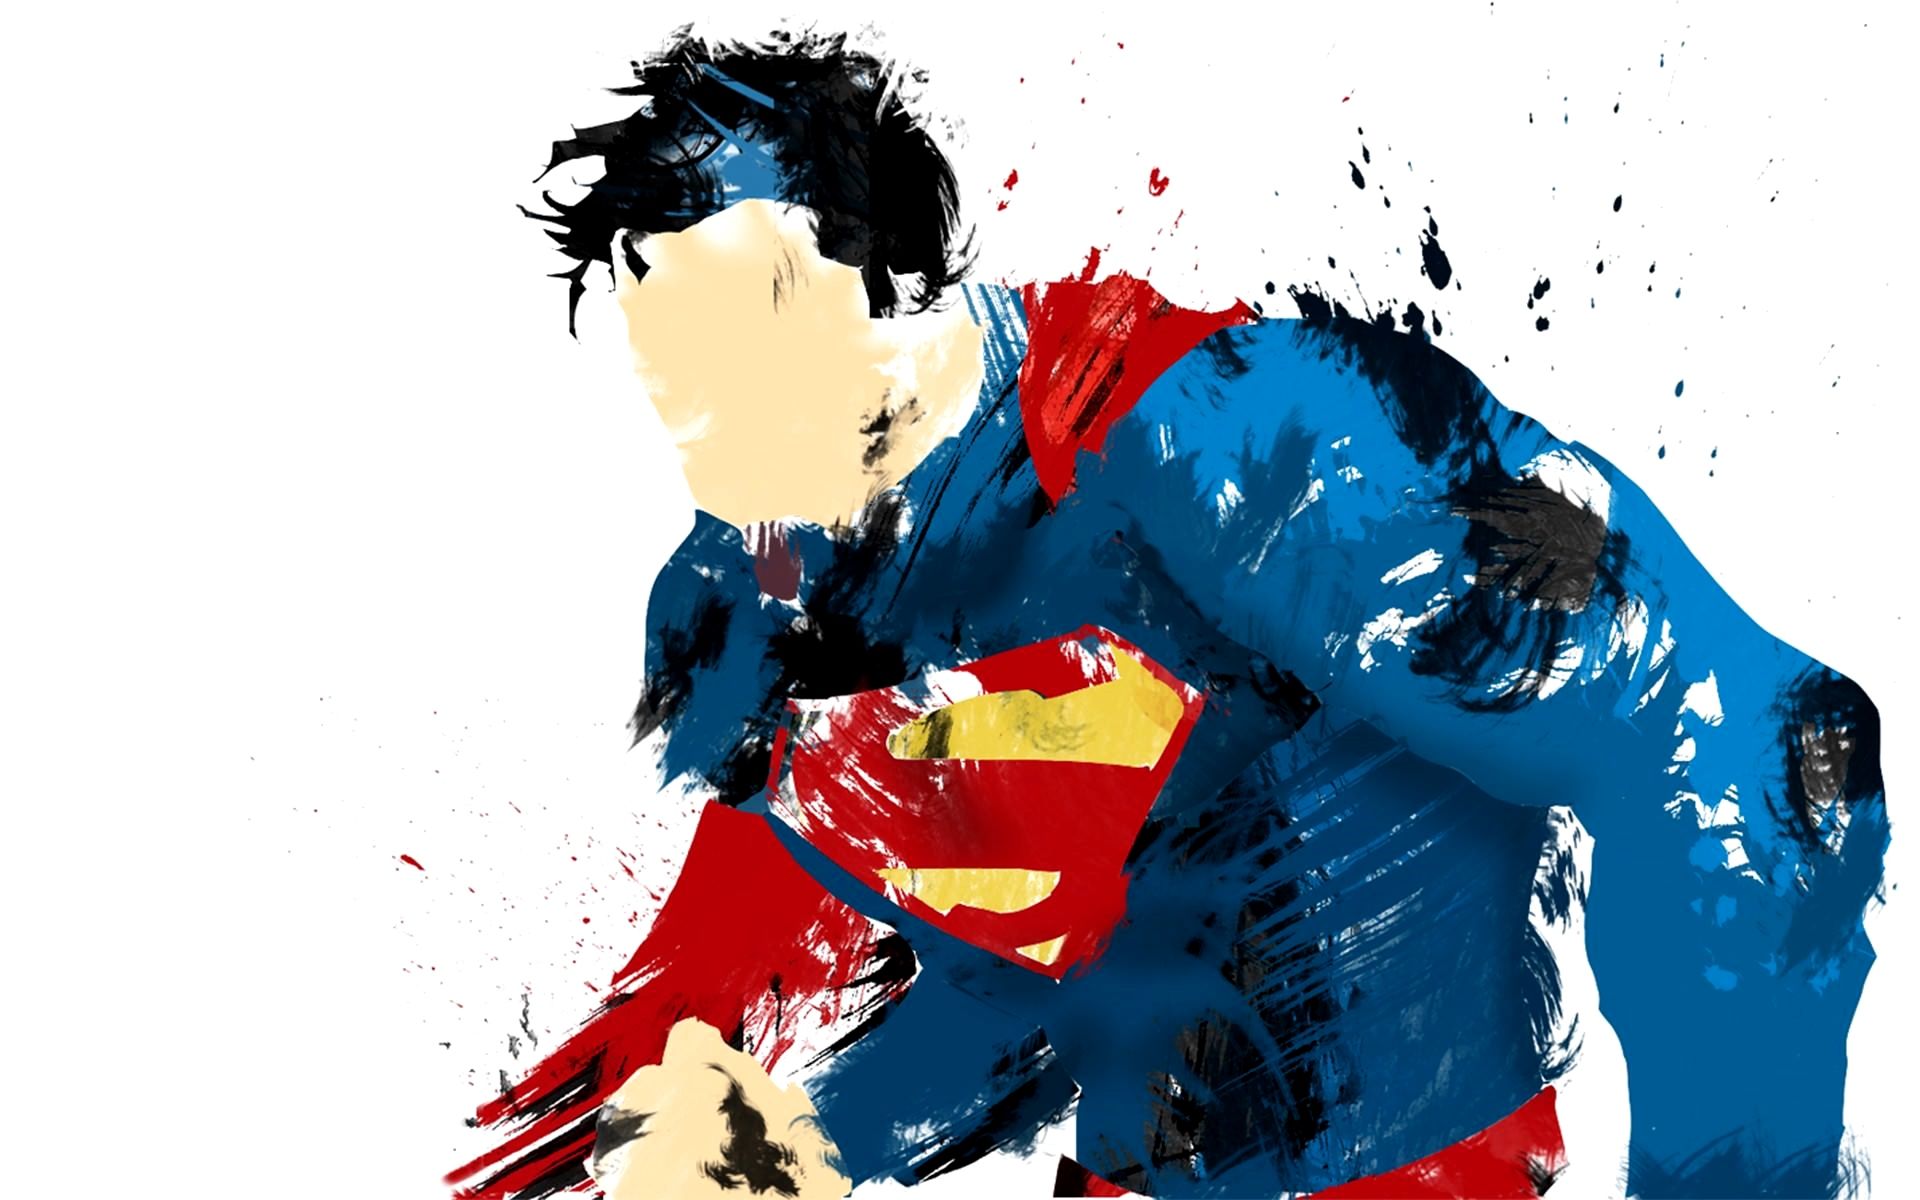 4K Wallpaper For Pc Dc Gallery. Superman wallpaper, Wallpaper pc, 4k wallpaper for pc